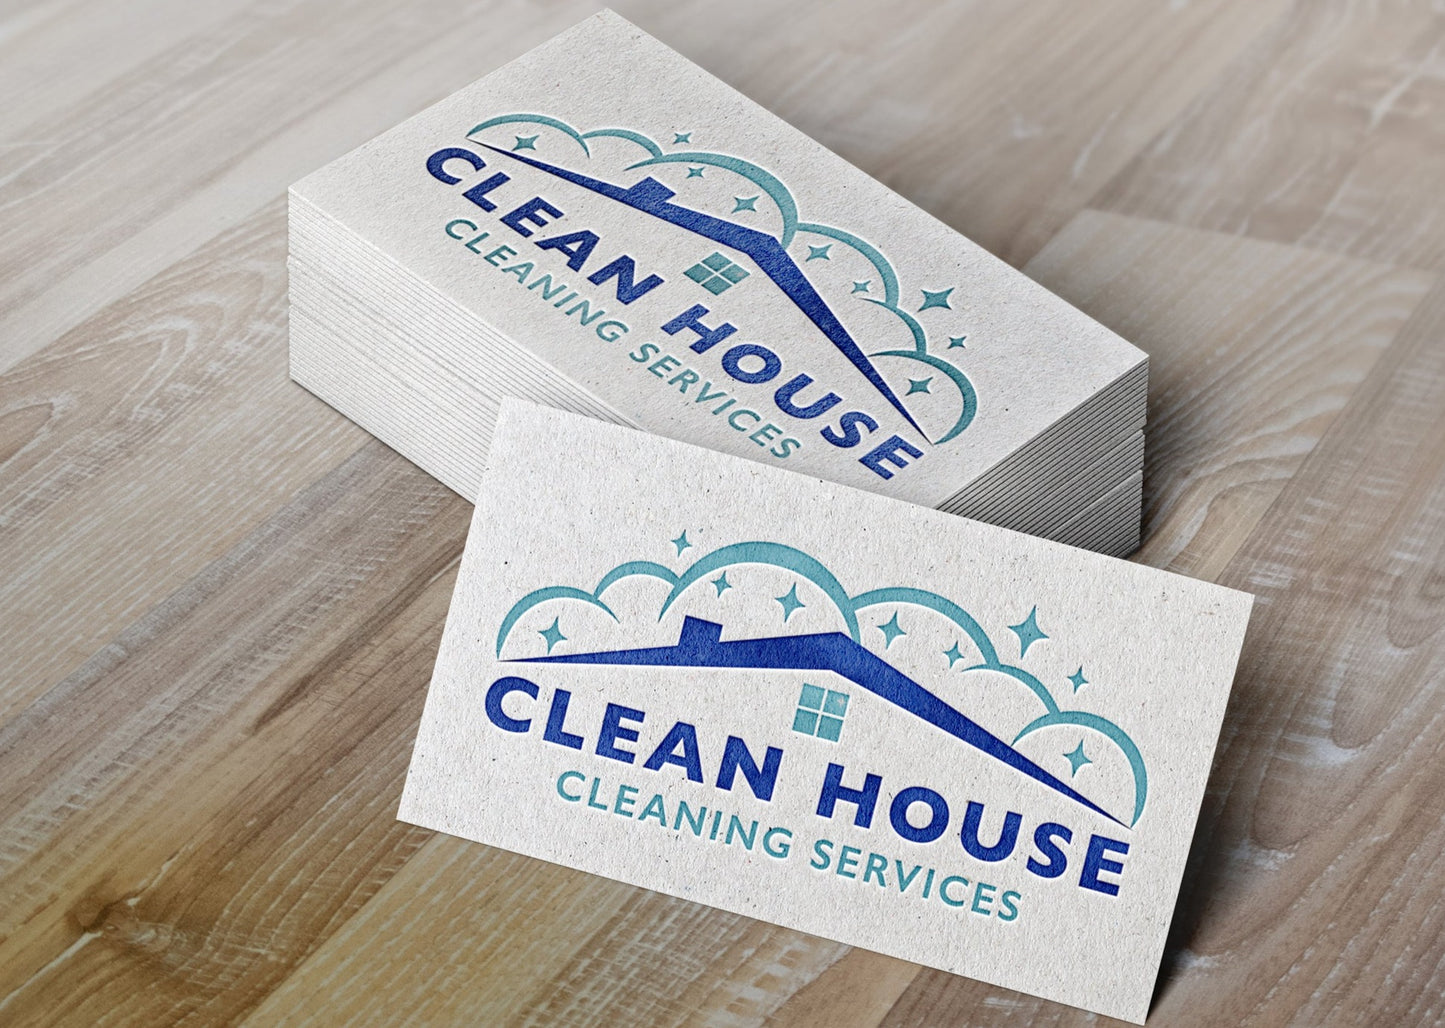 Cleaning Services Logo Design | Cleaning Business Logo | Housekeeping Logo | House Cleaning Logo | Residential | Office Cleaning Services